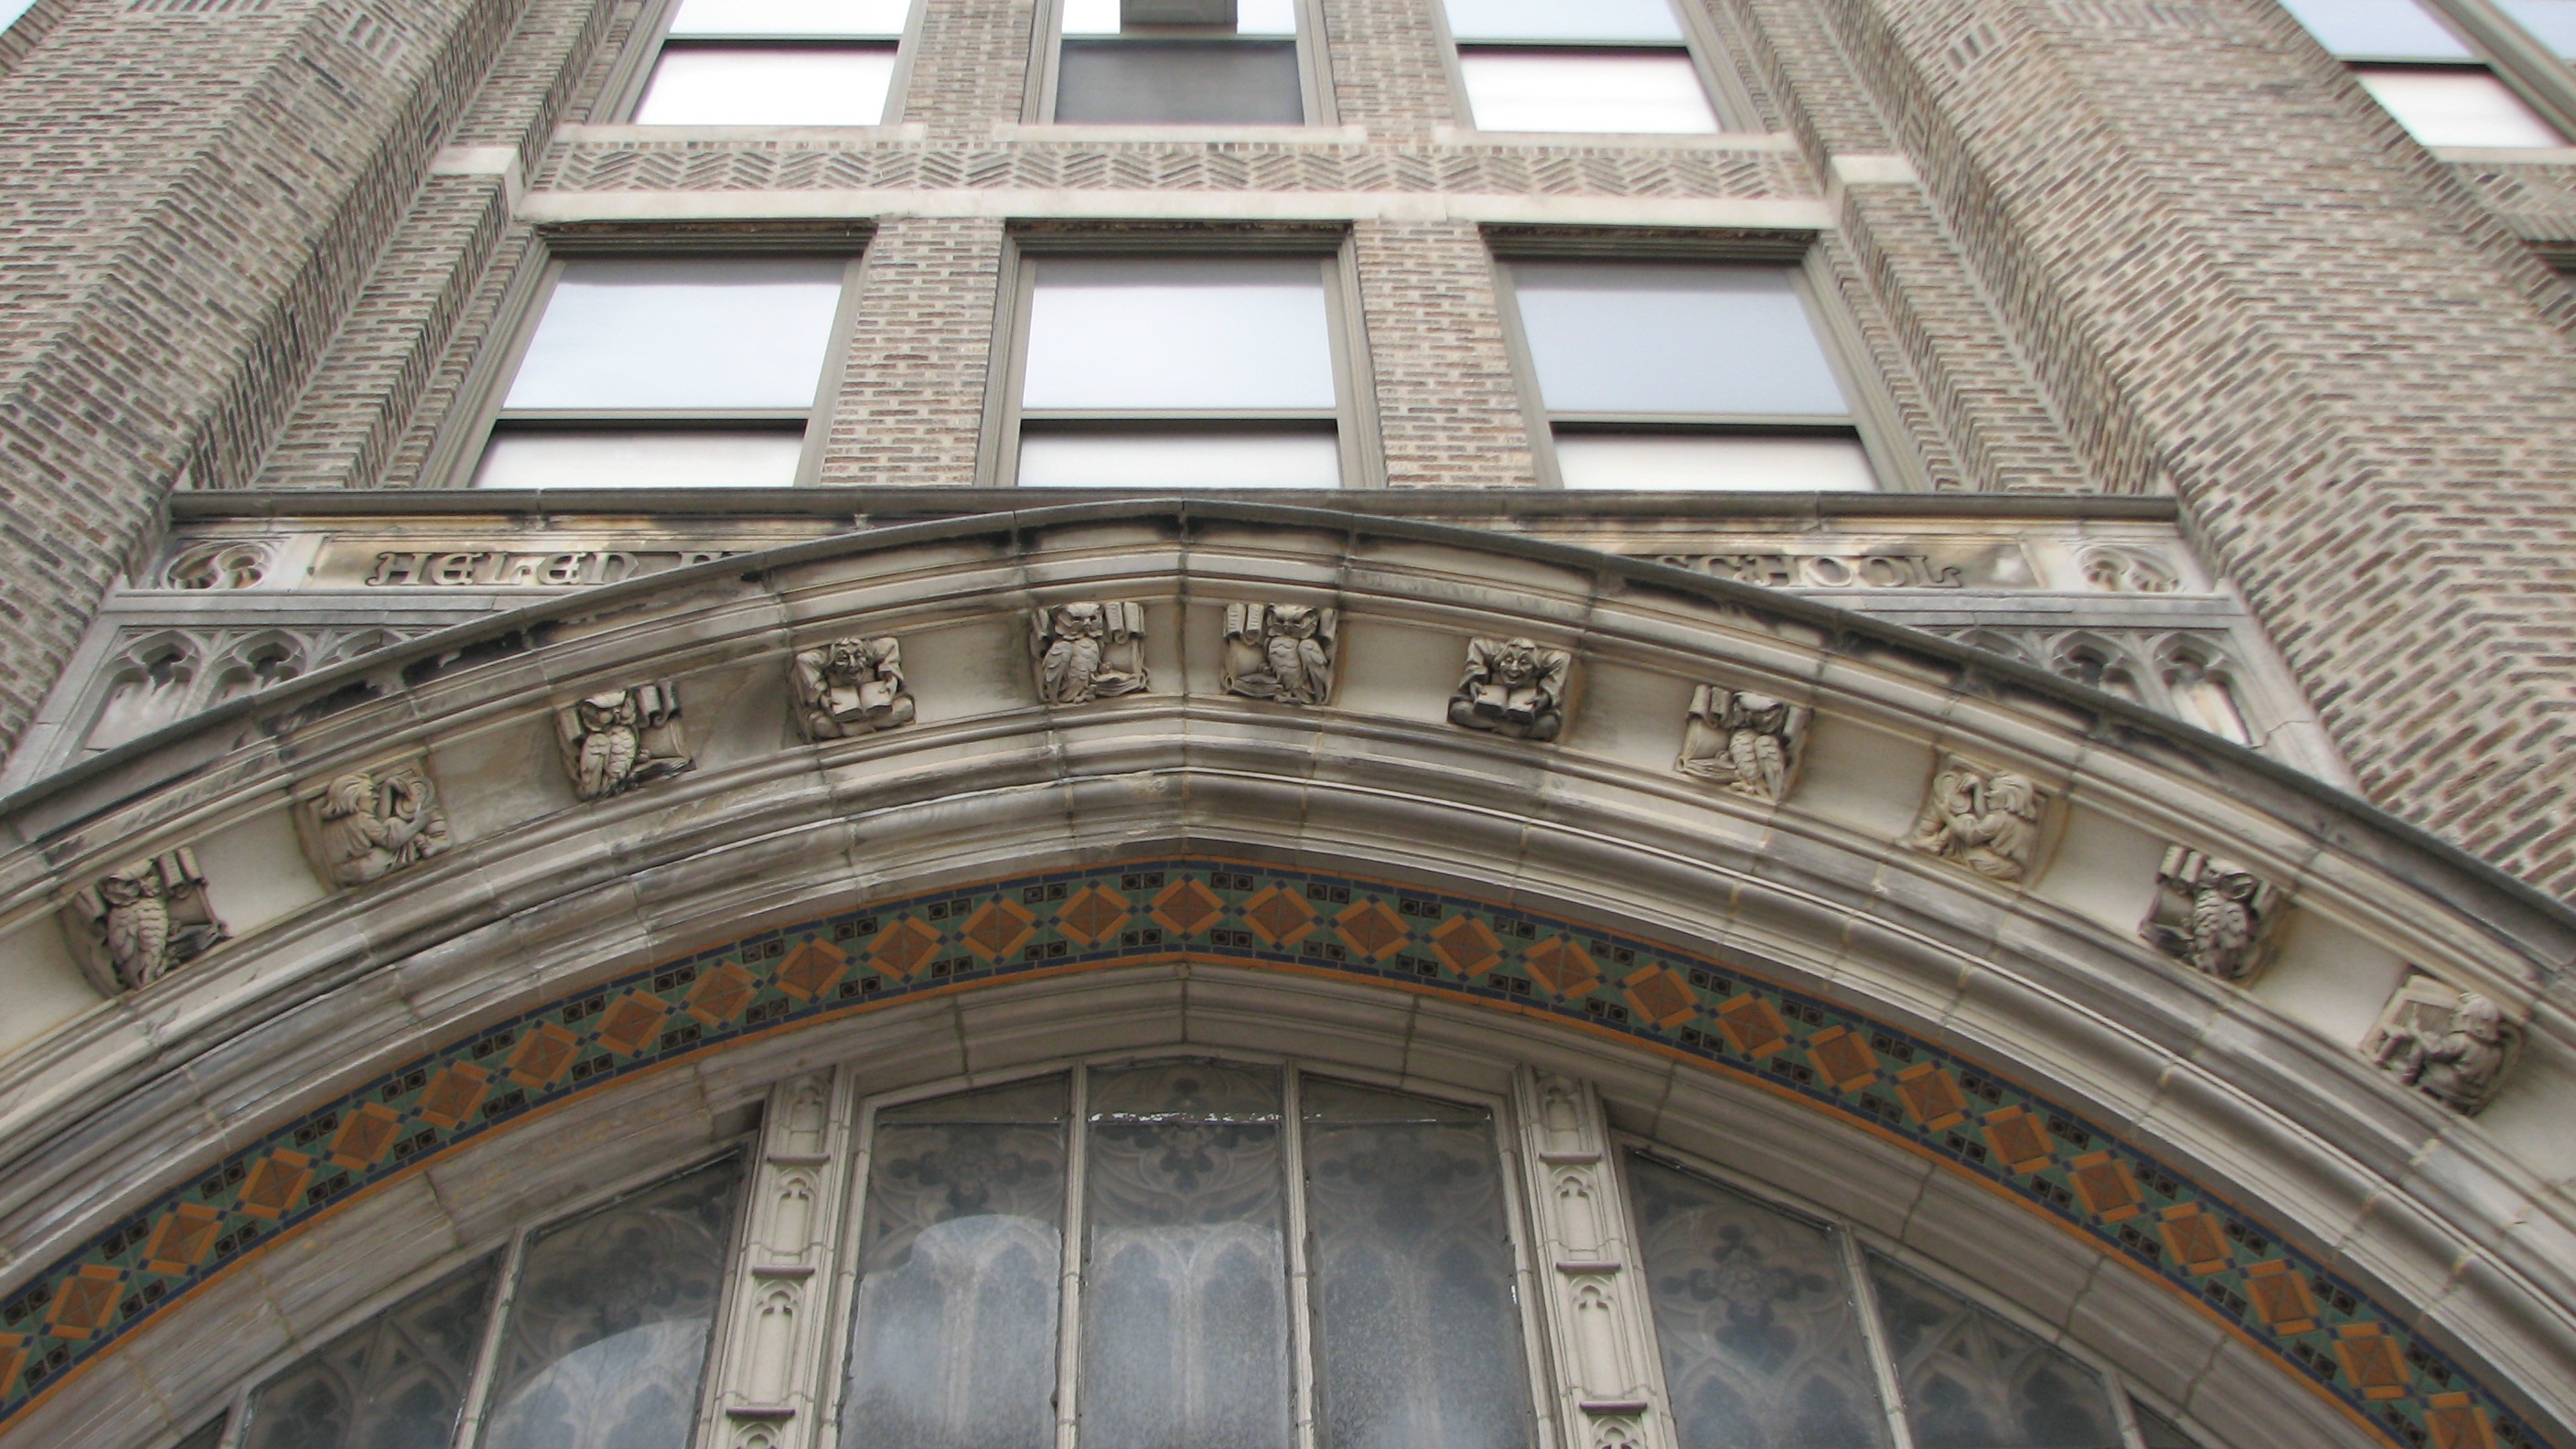 The Gothic arched entrance to the Philadelphia High School for Business, 13th and Brandywine Streets.